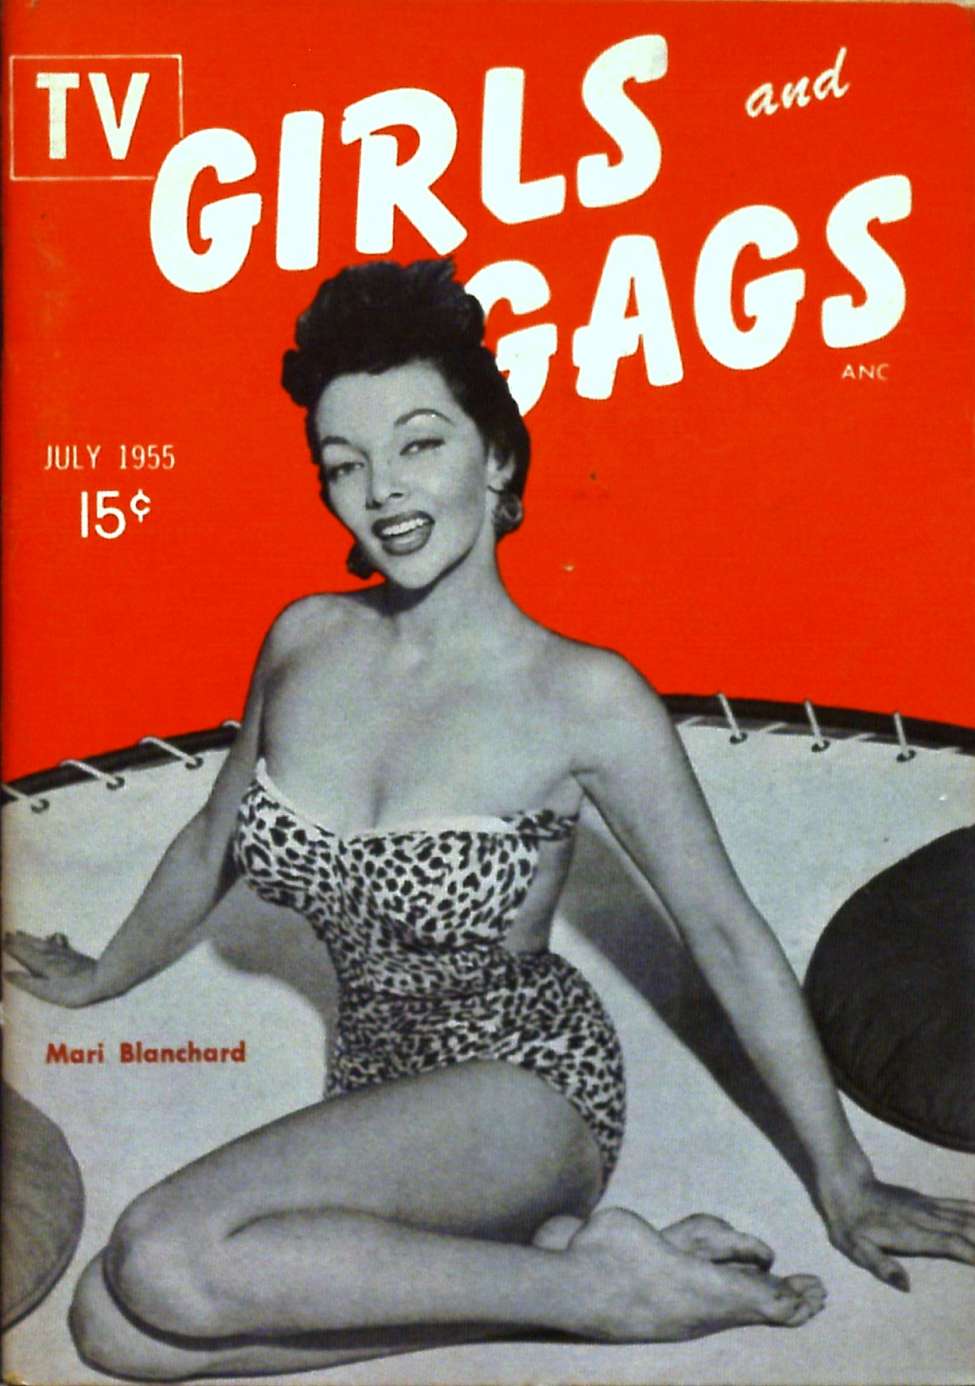 Book Cover For TV Girls and Gags v2 1